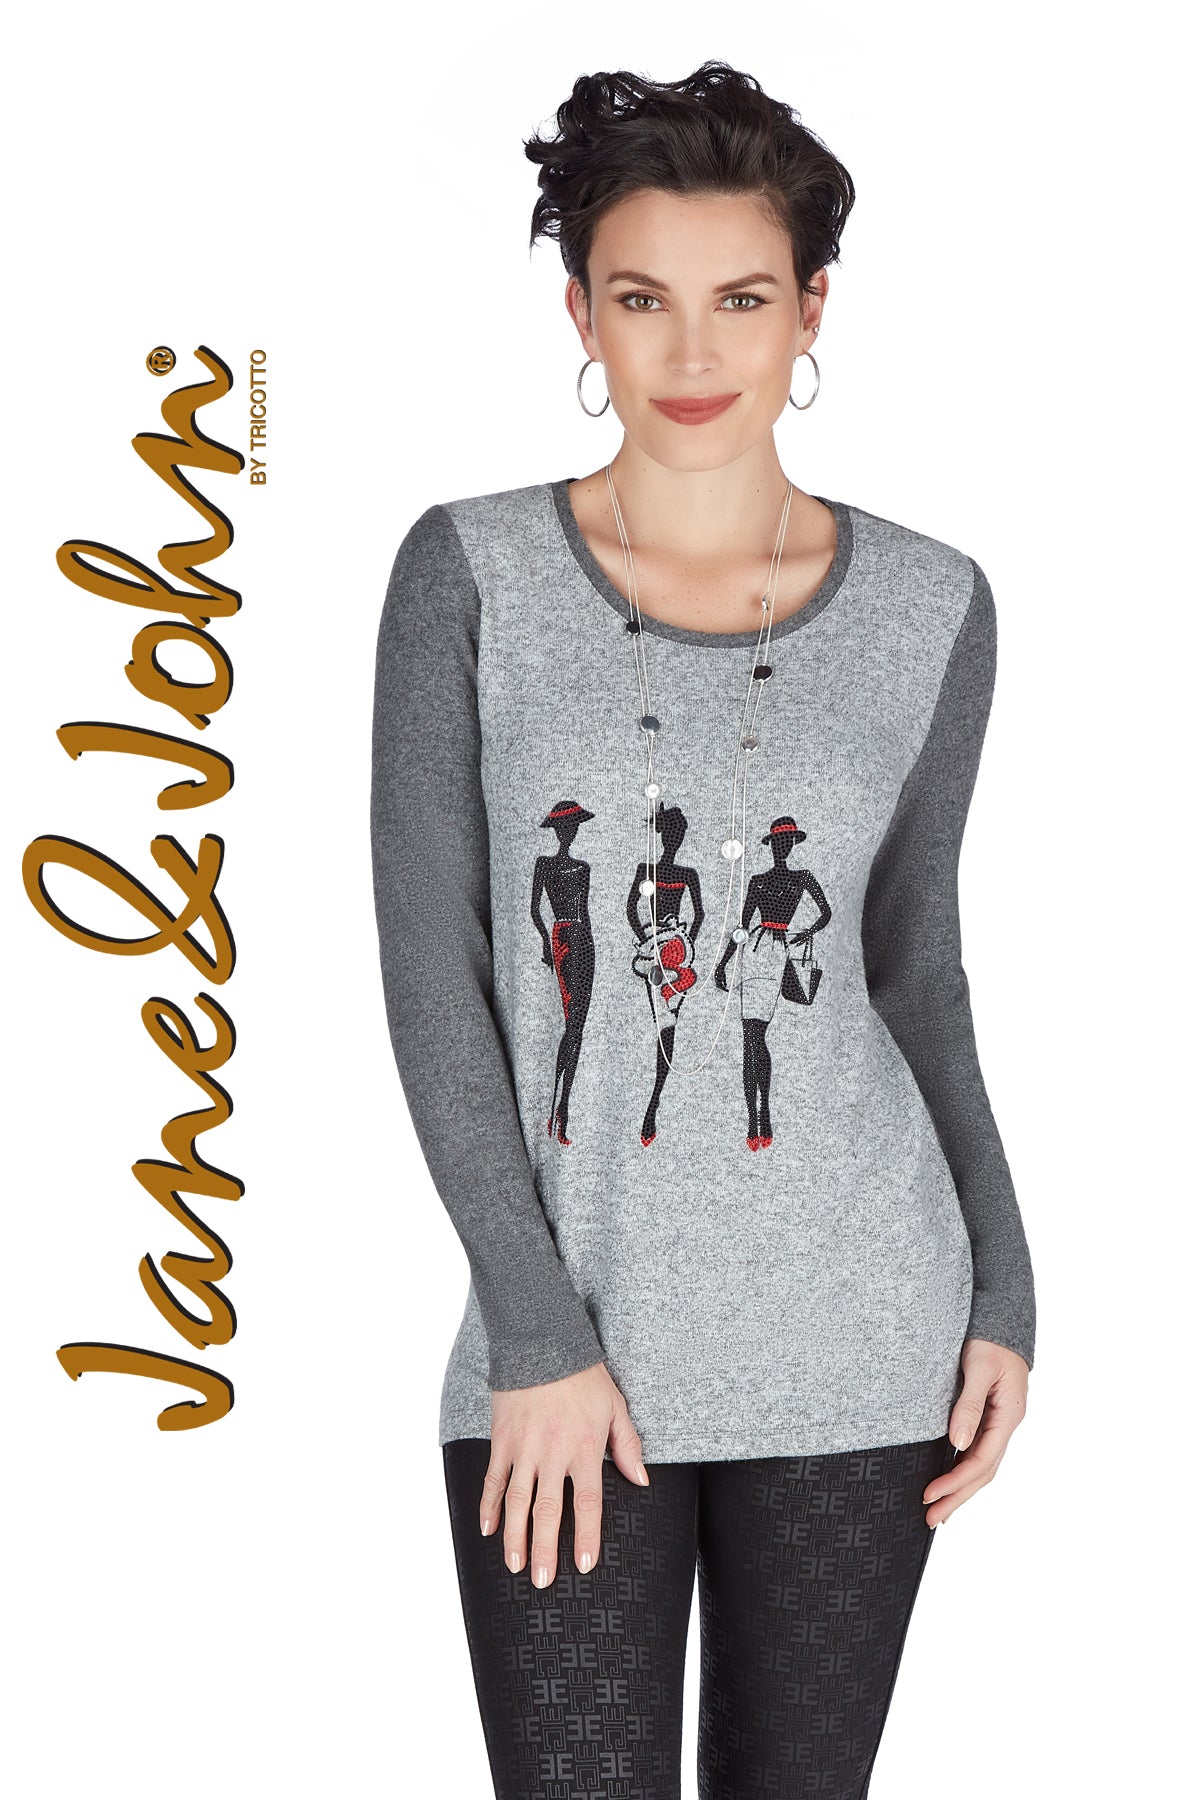 Jane & John Sweaters-Jane & John Clothing-Buy Tricotto Clothing Online-Tricotto Fashion Quebec-Online Sweater Shop